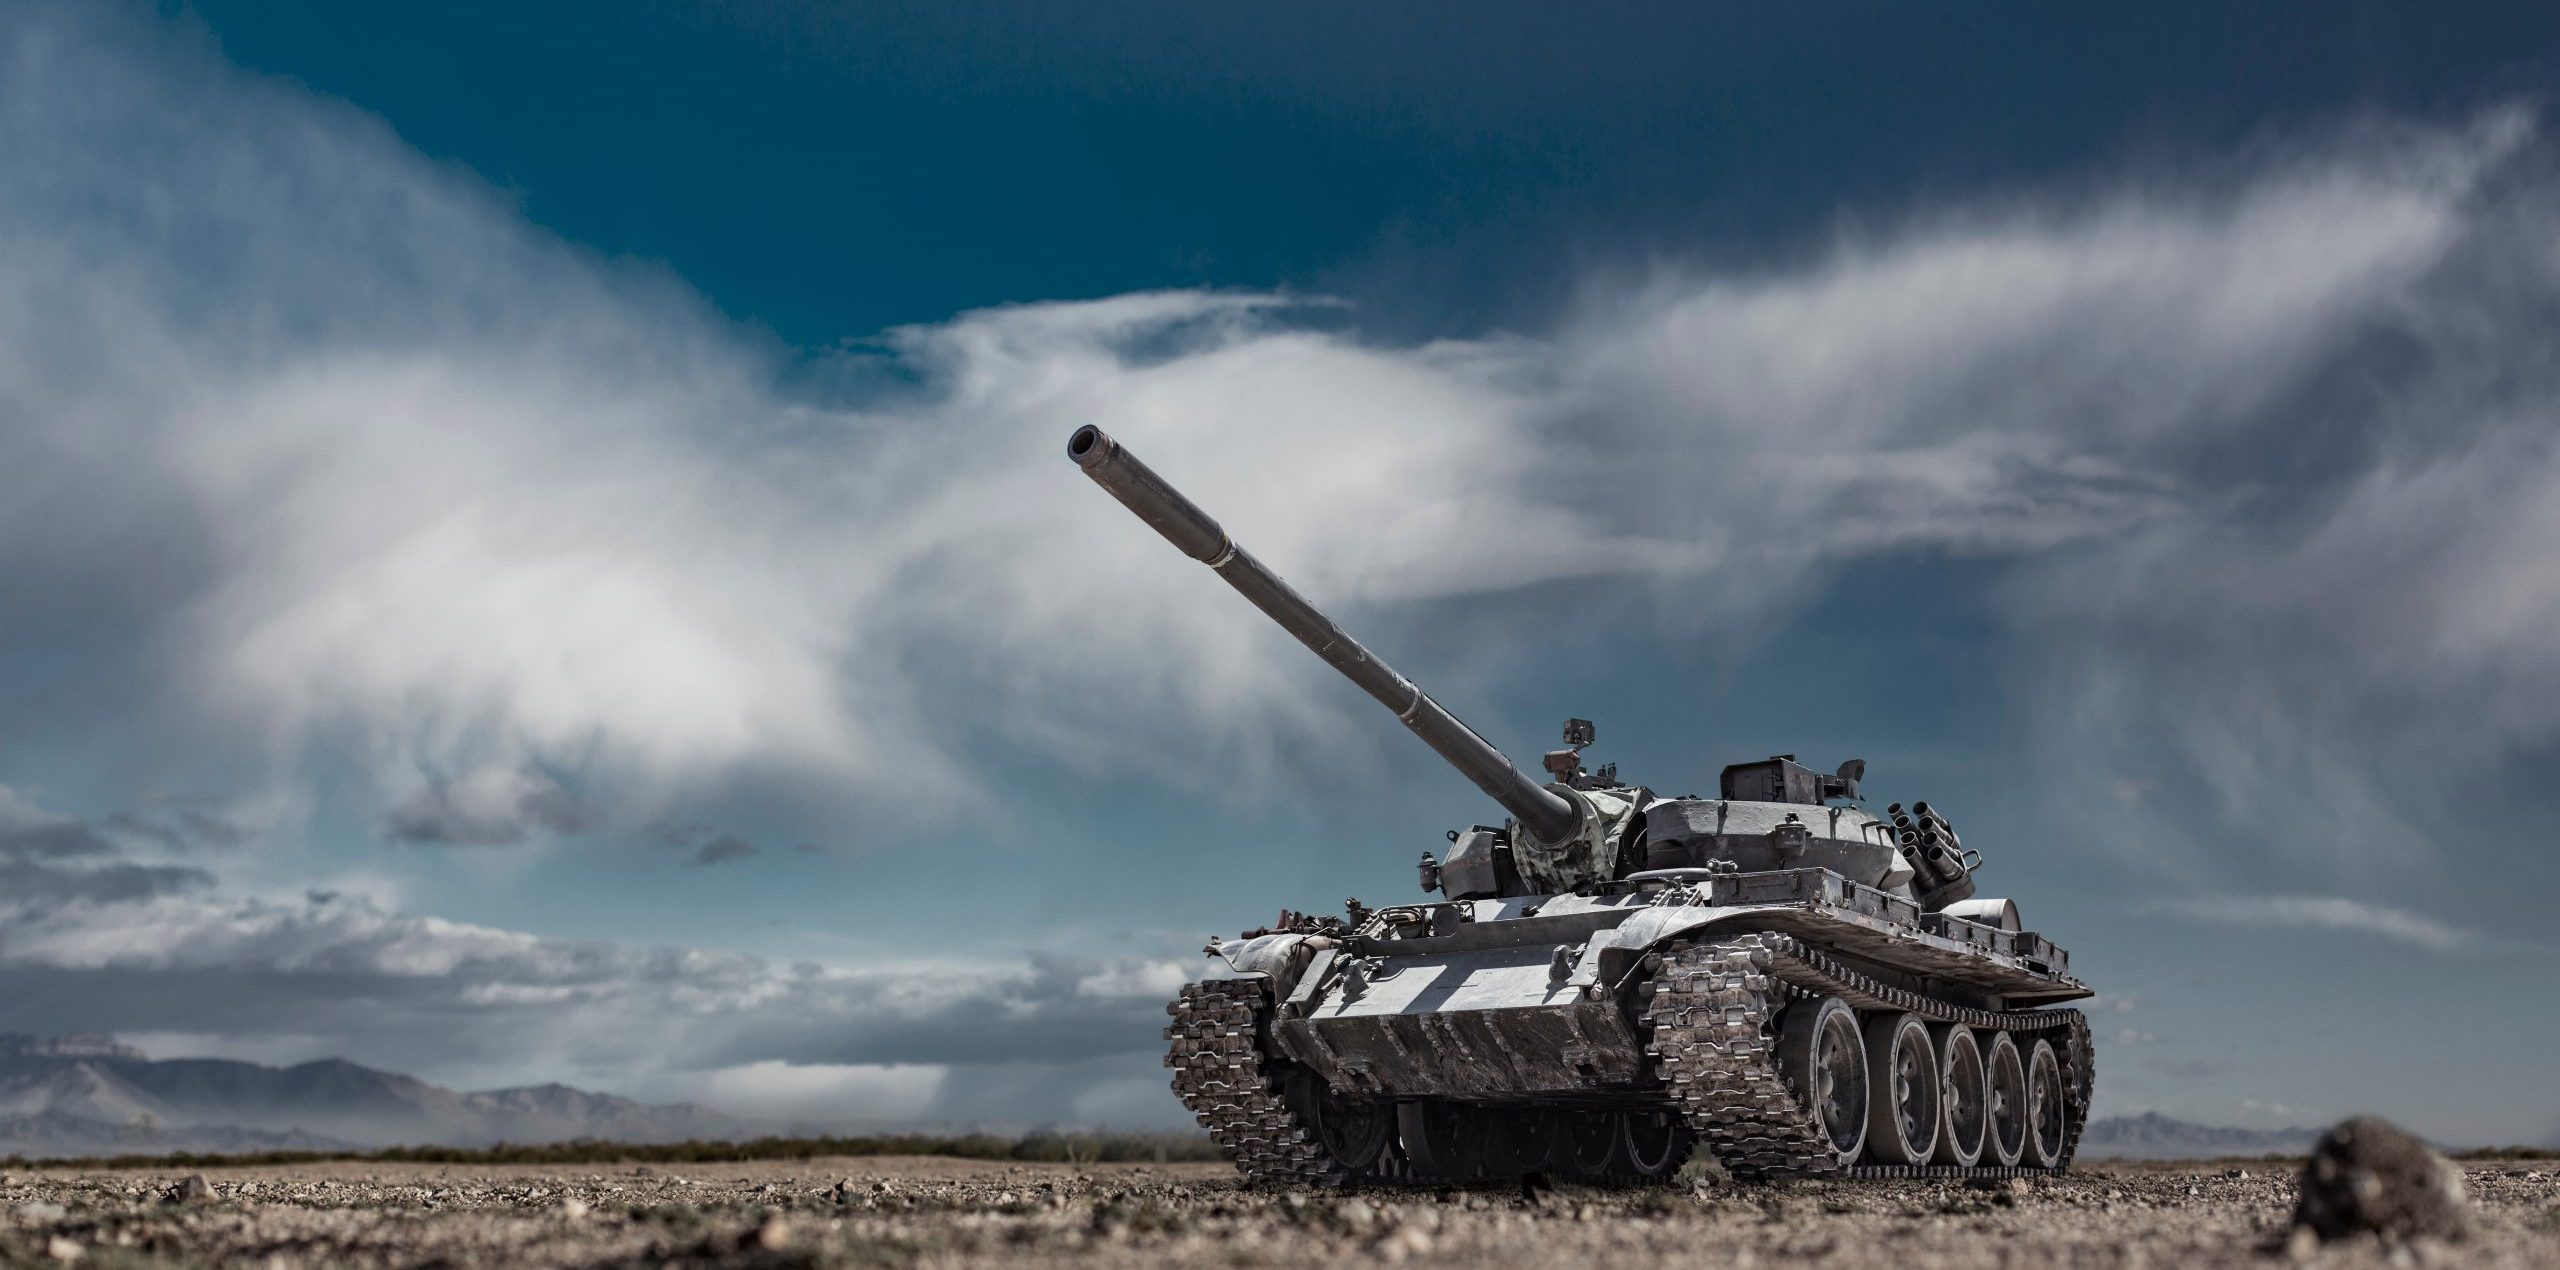 Military or army tank ready to attack moving over a deserted battle field terrain